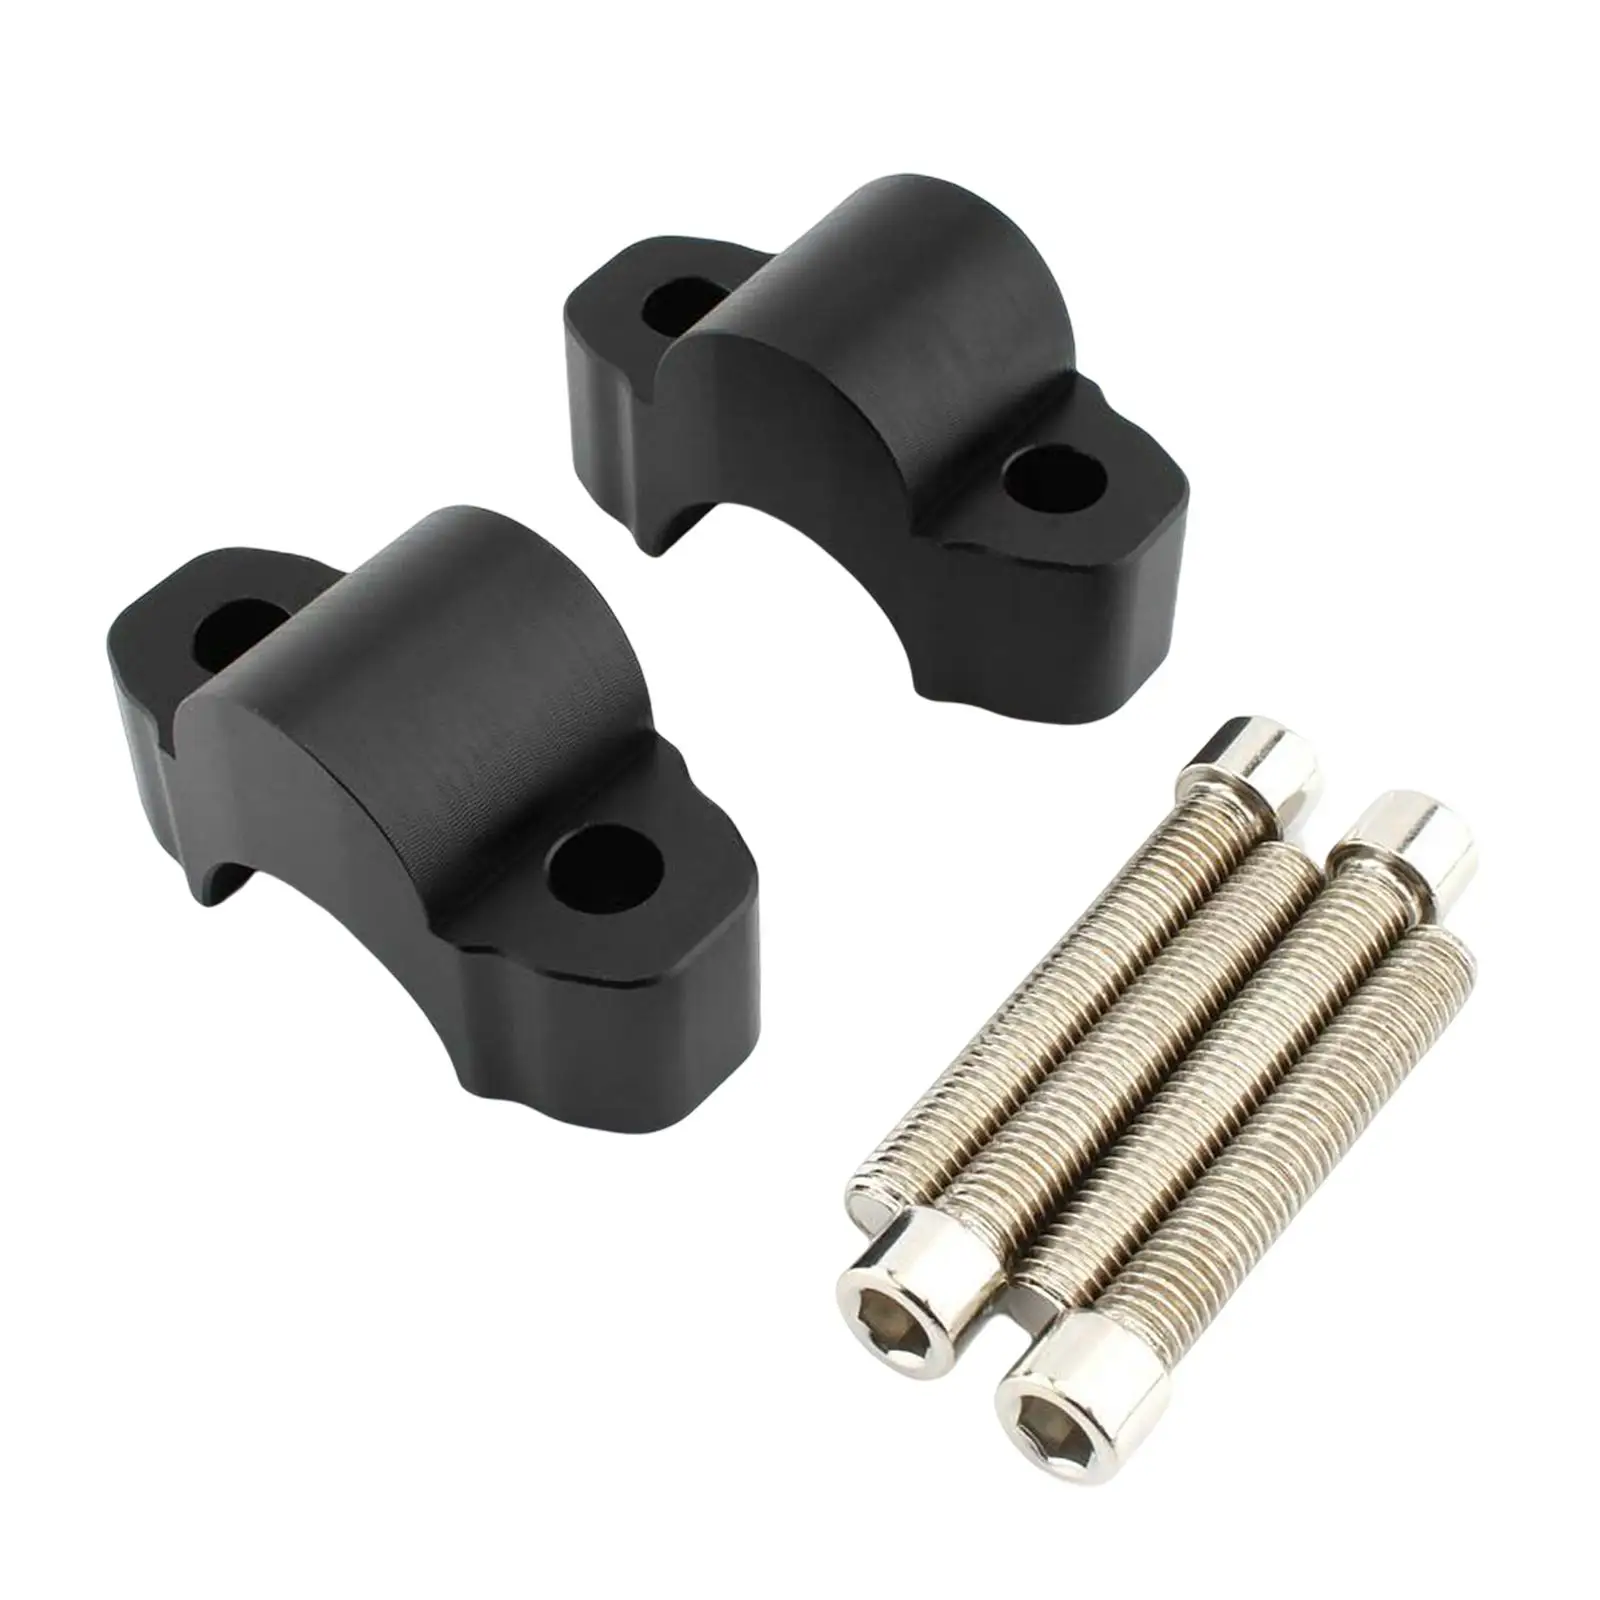 Handlebar Mount Clamp Aluminum Alloy Fit for Tenere 700 XT700 Replace